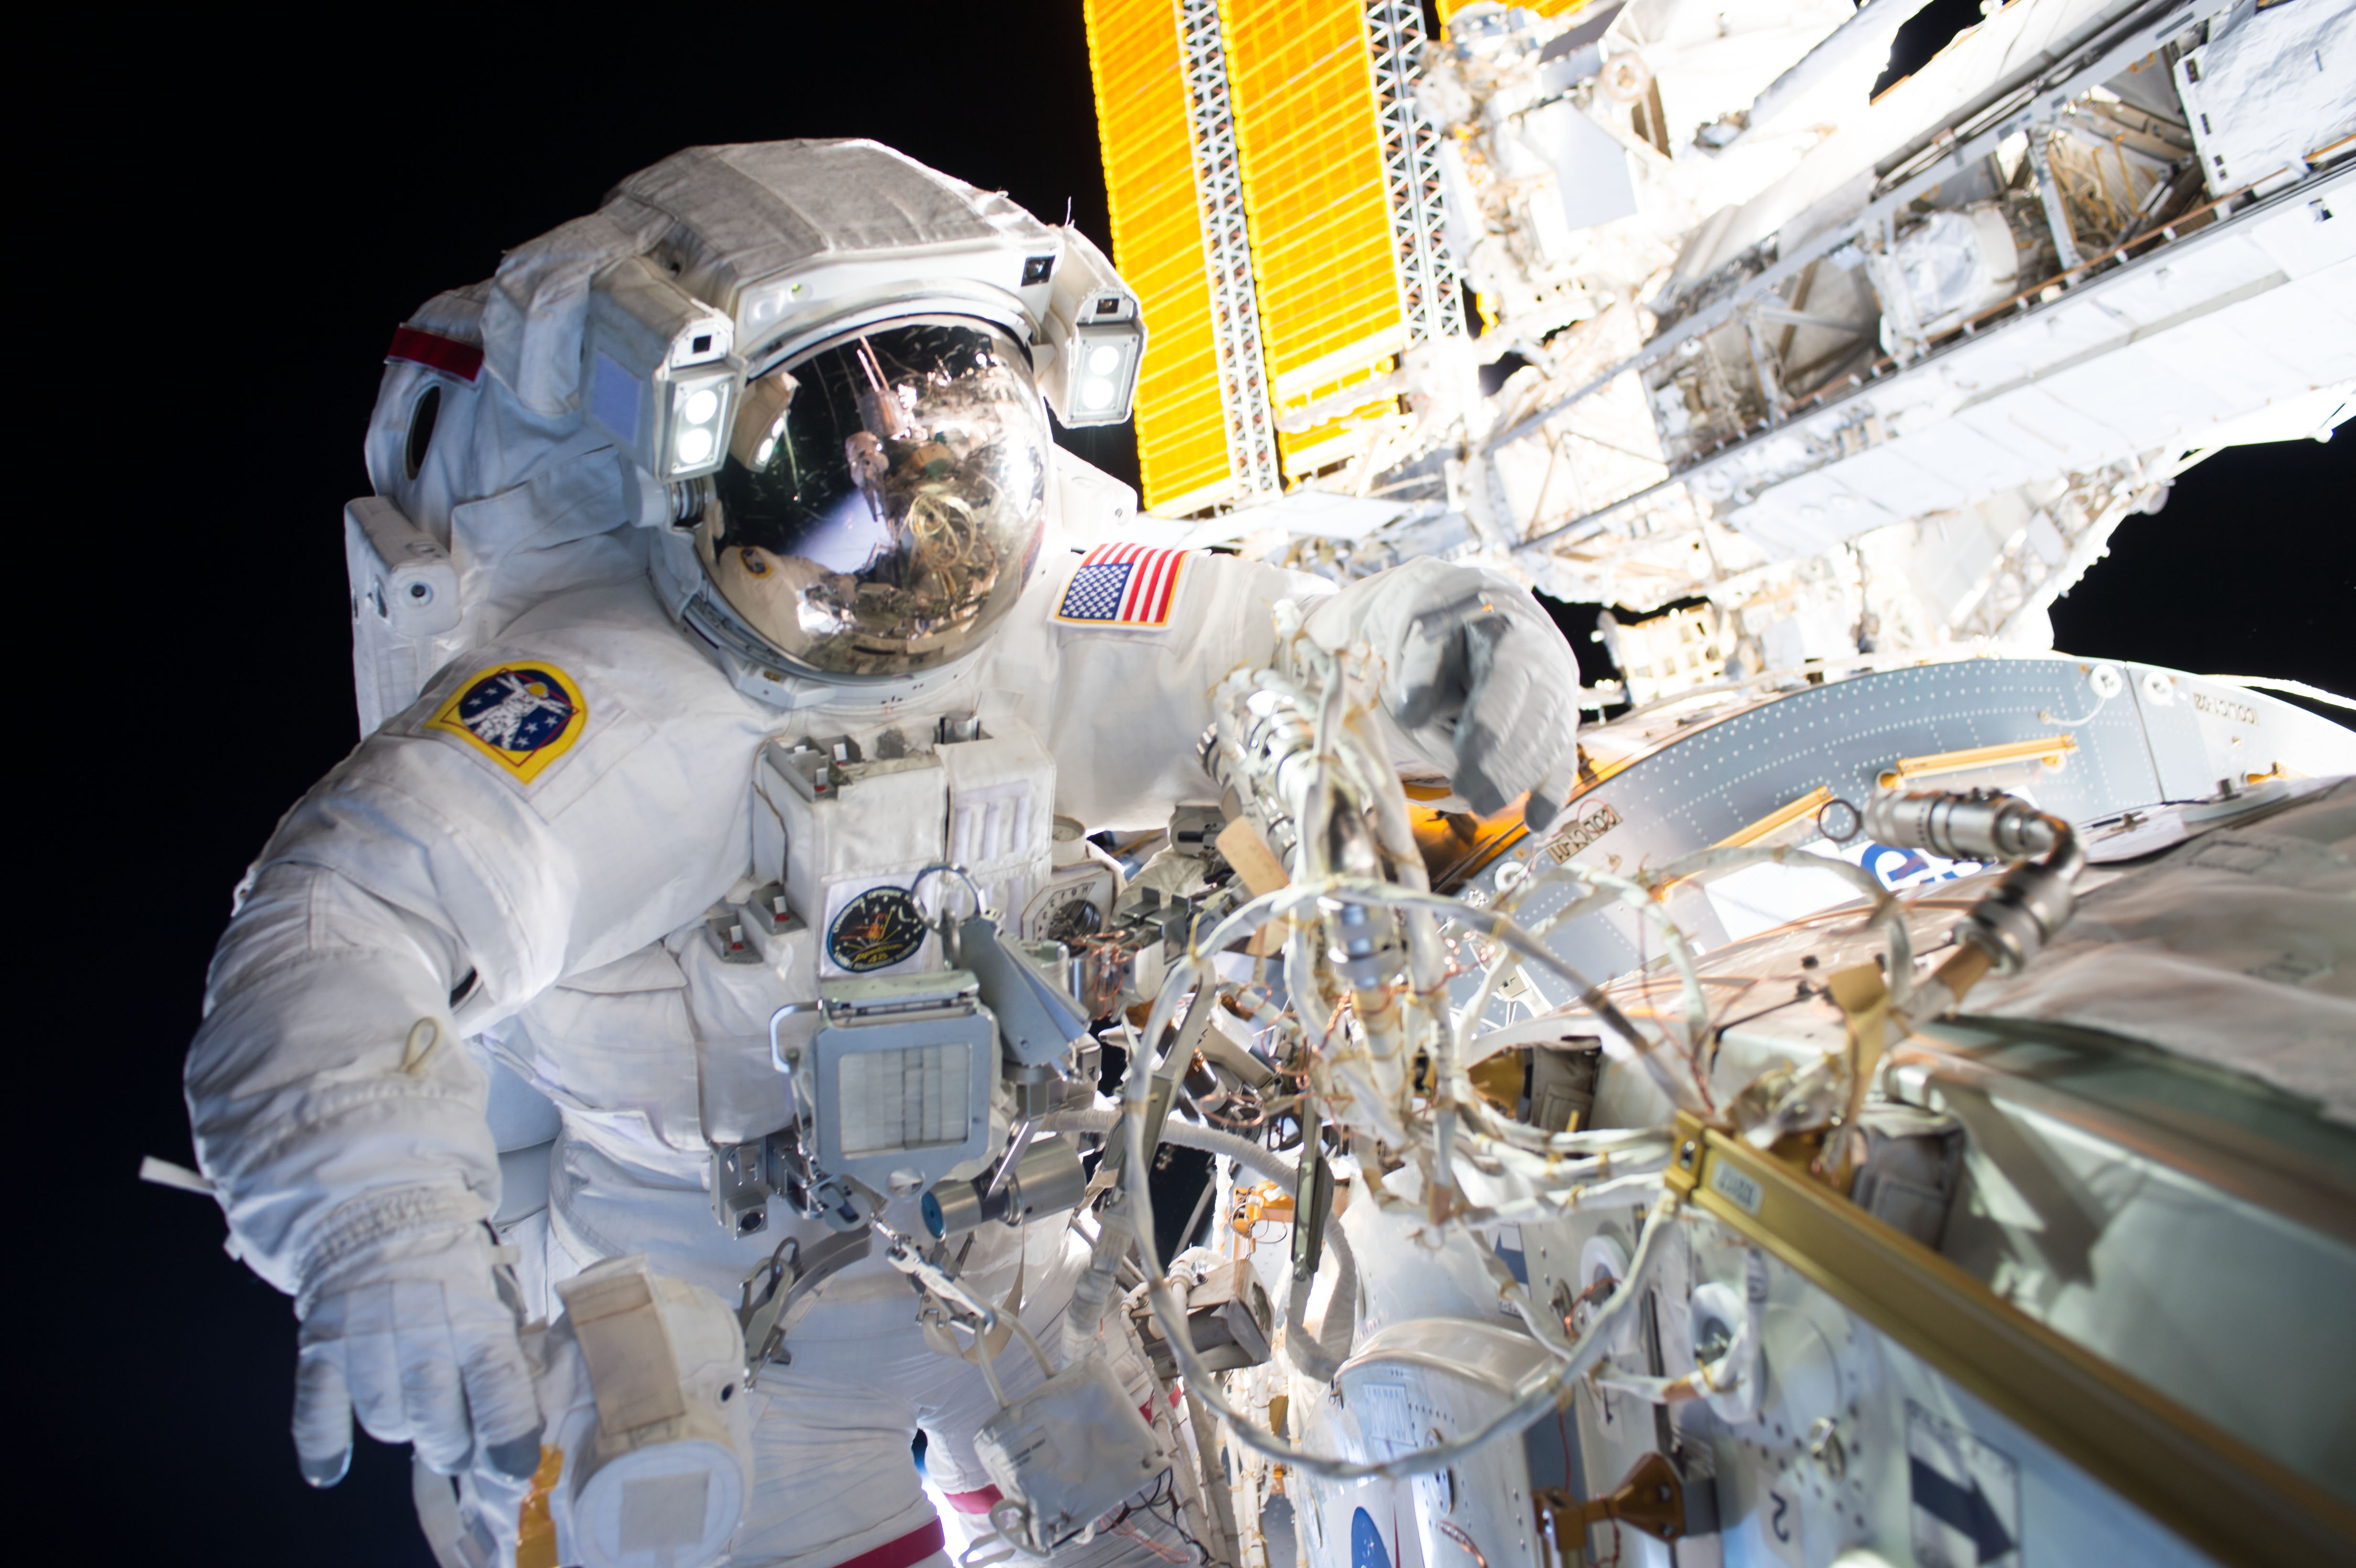 Spacewalkers Successfully Install New Docking Adapter | NASA